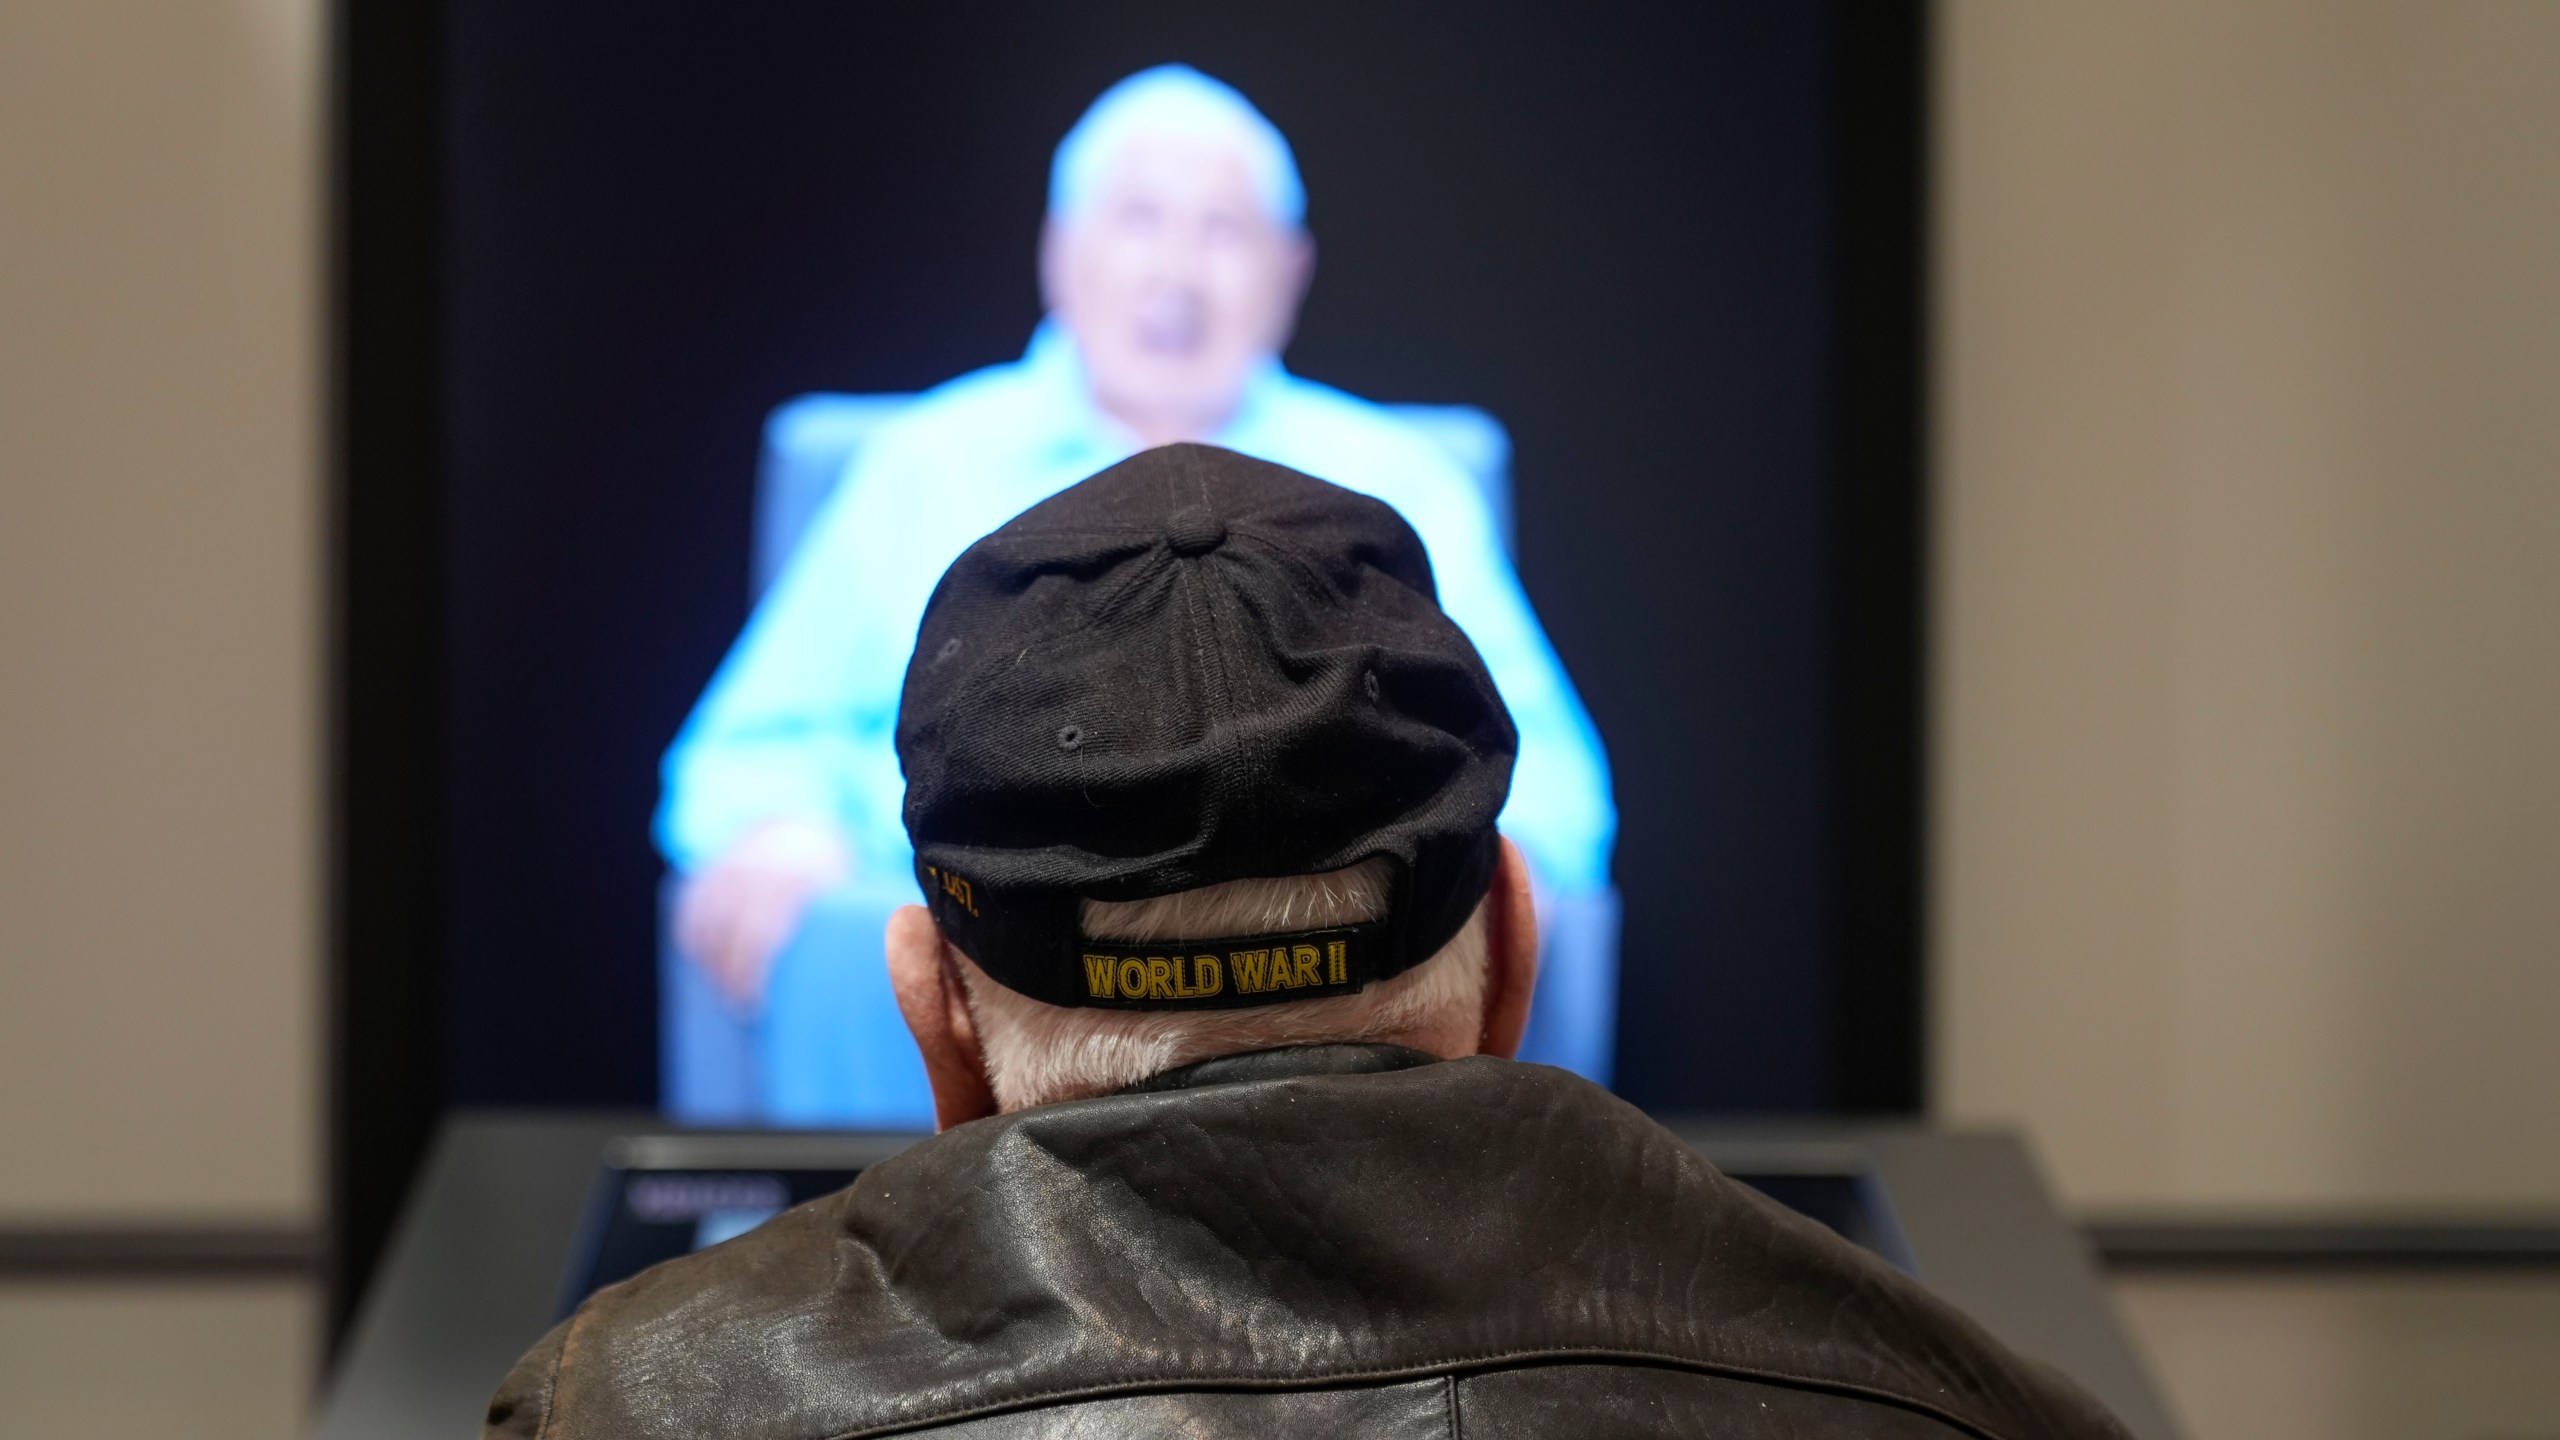 World War II veteran Olin Pickens, of Nesbit, Miss., who served in the U.S. Army 805th Tank Destroyer Battalion, looks at the virtual exhibit of himself at the National World War II Museum in New Orleans, Wednesday, March 20, 2024. An interactive exhibit opening Wednesday at the museum will use artificial intelligence to let visitors hold virtual conversations with images of veterans, including a Medal of Honor winner who died in 2022. (AP Photo/Gerald Herbert)